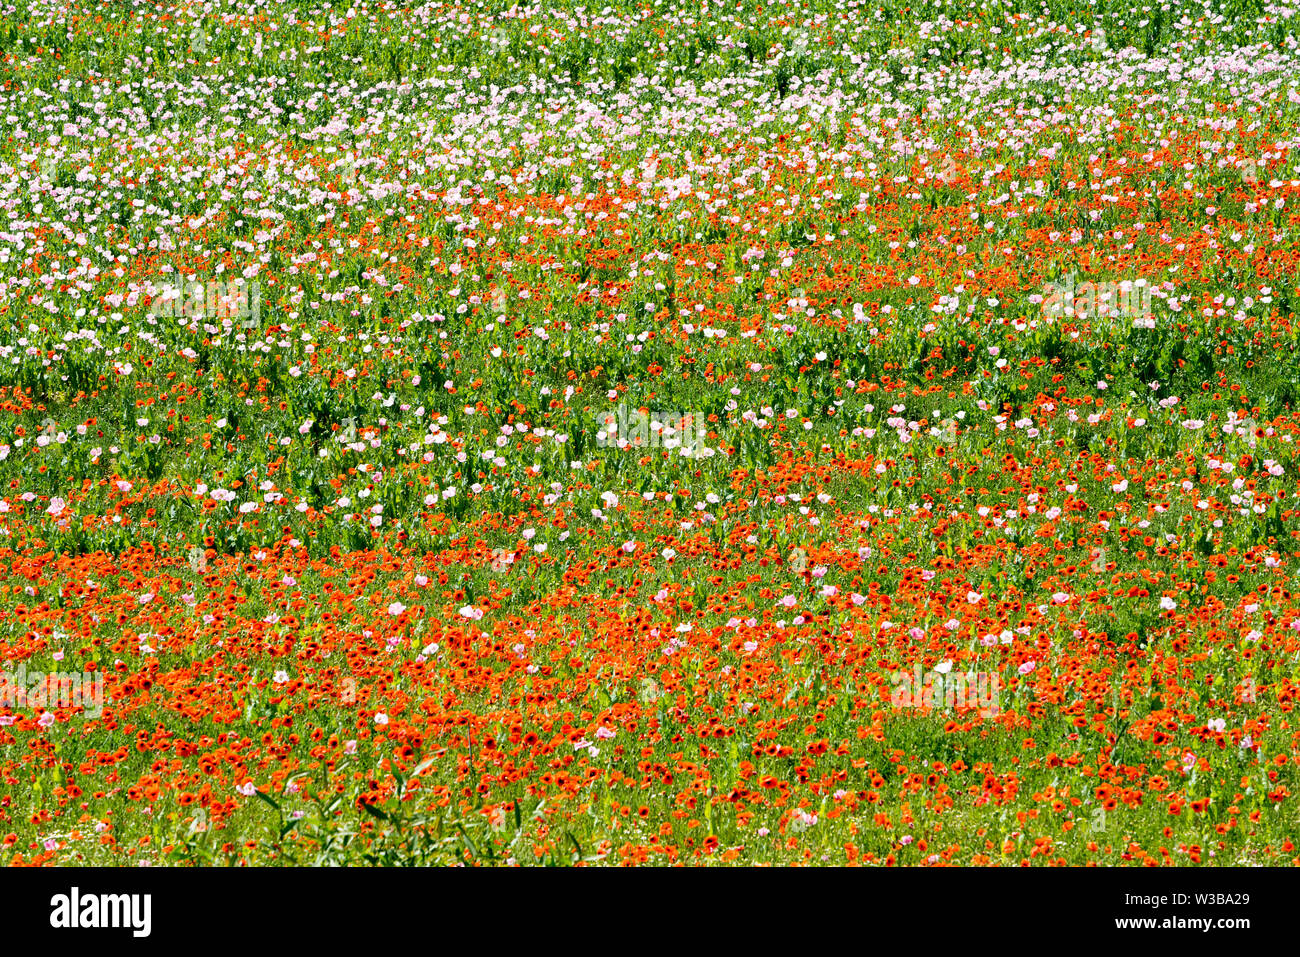 Opium poppy and red poppies field, Germerode, Werra-Meissner district, Hesse, Germany Stock Photo